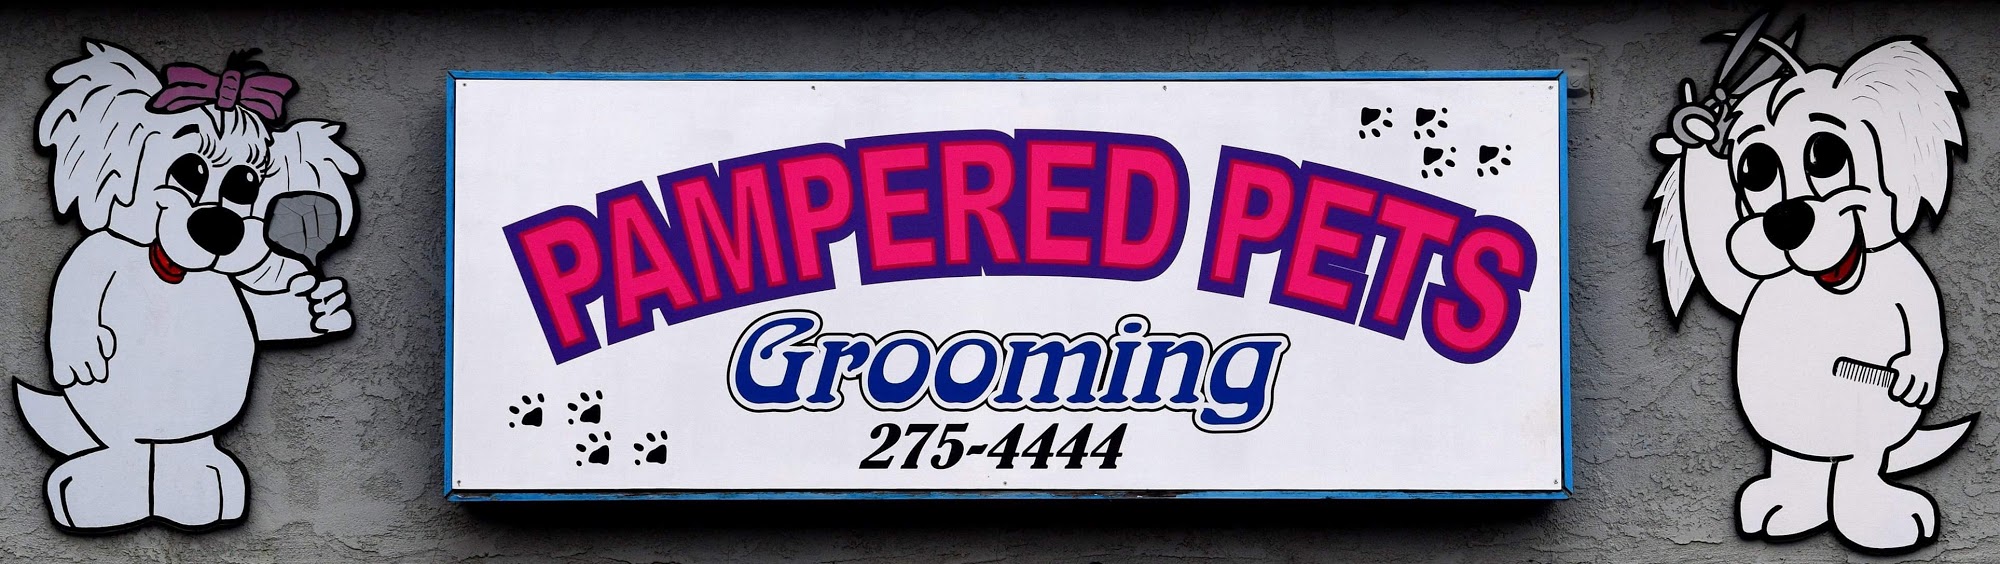 Pampered Pets Grooming